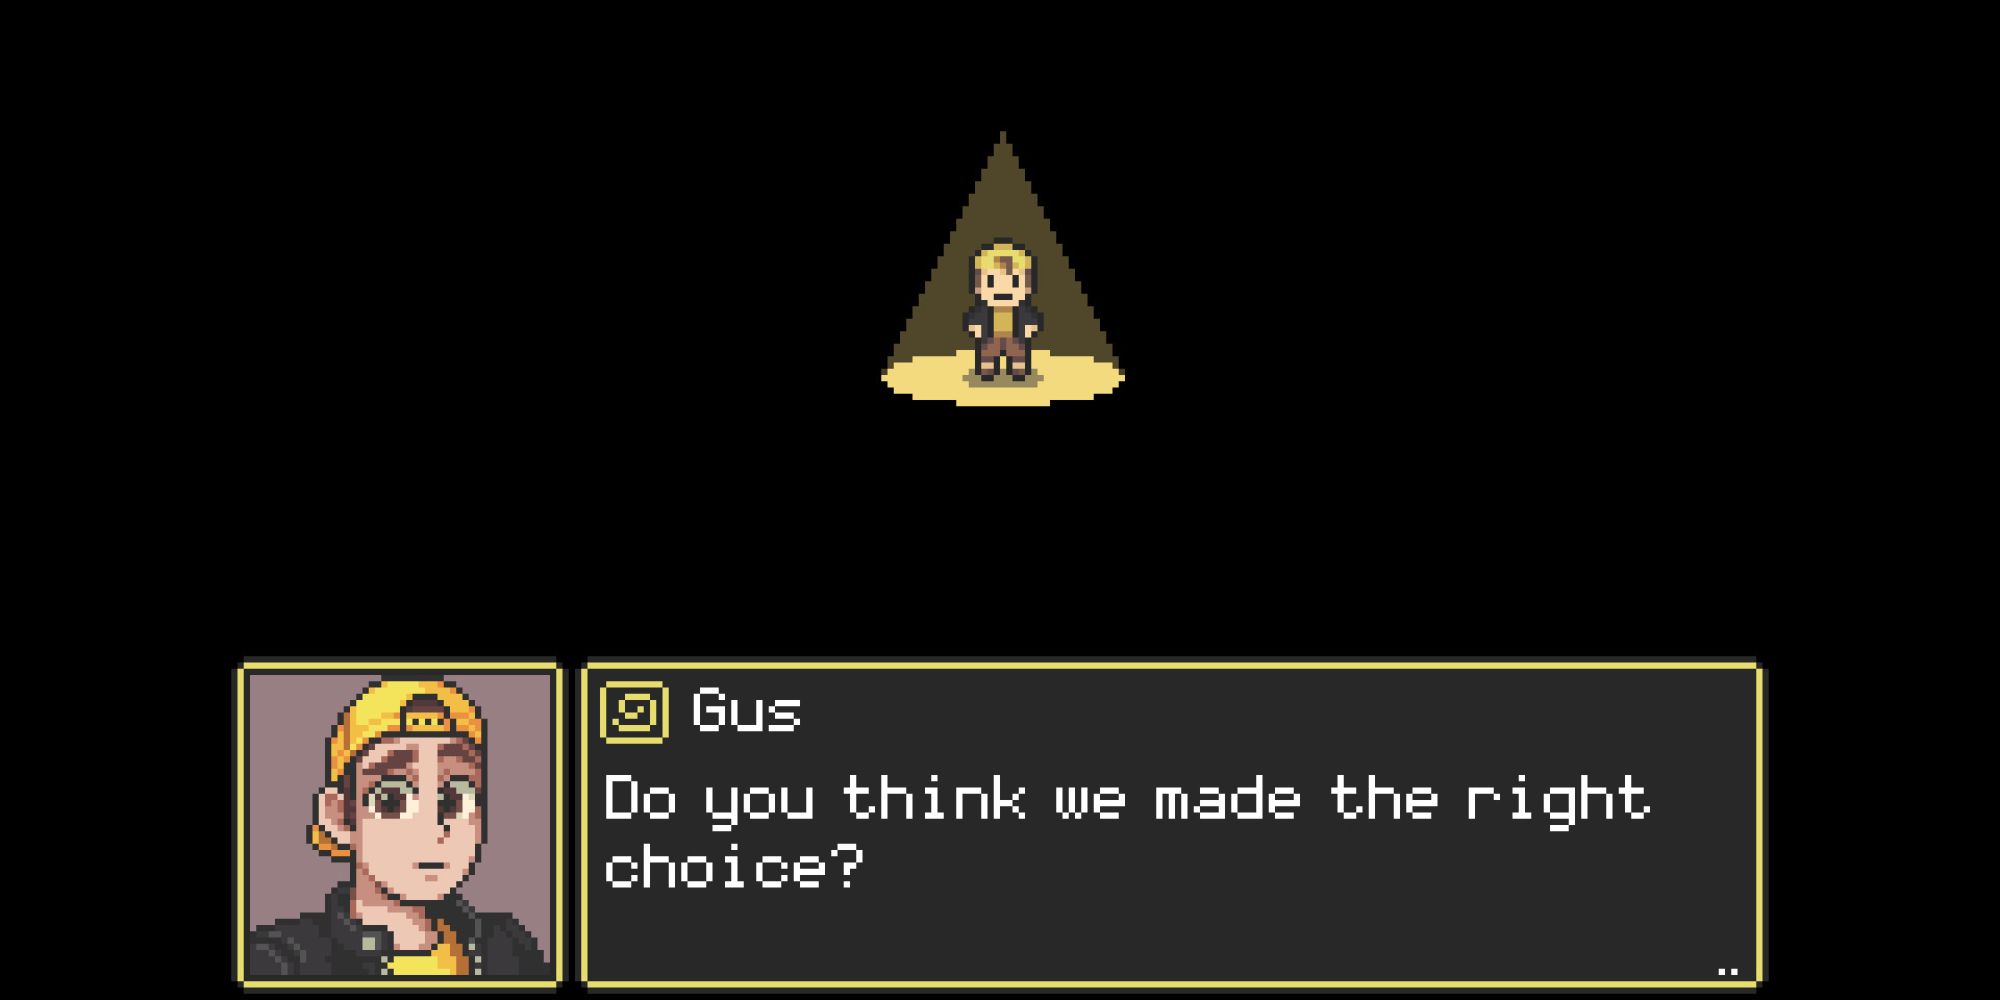 Gus asking if he made the right choice in GLITCHED